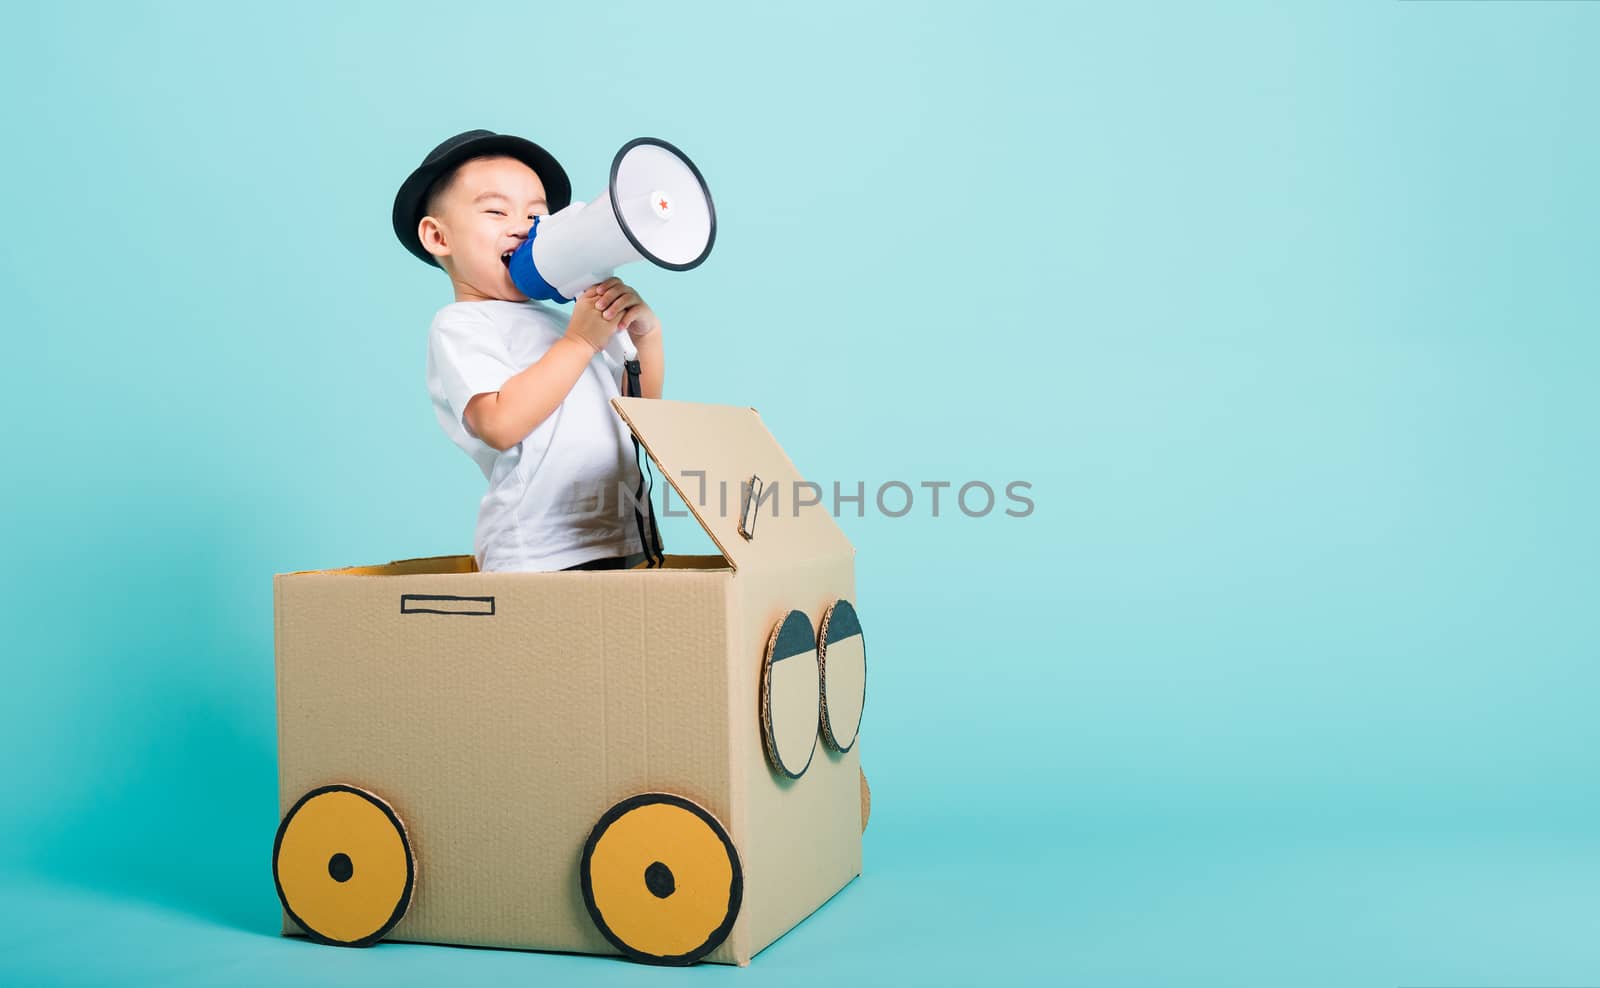 Happy Asian children boy smile in driving play car creative by a cardboard box imagination with megaphone, summer holiday travel concept, studio shot on blue background with copy space for text